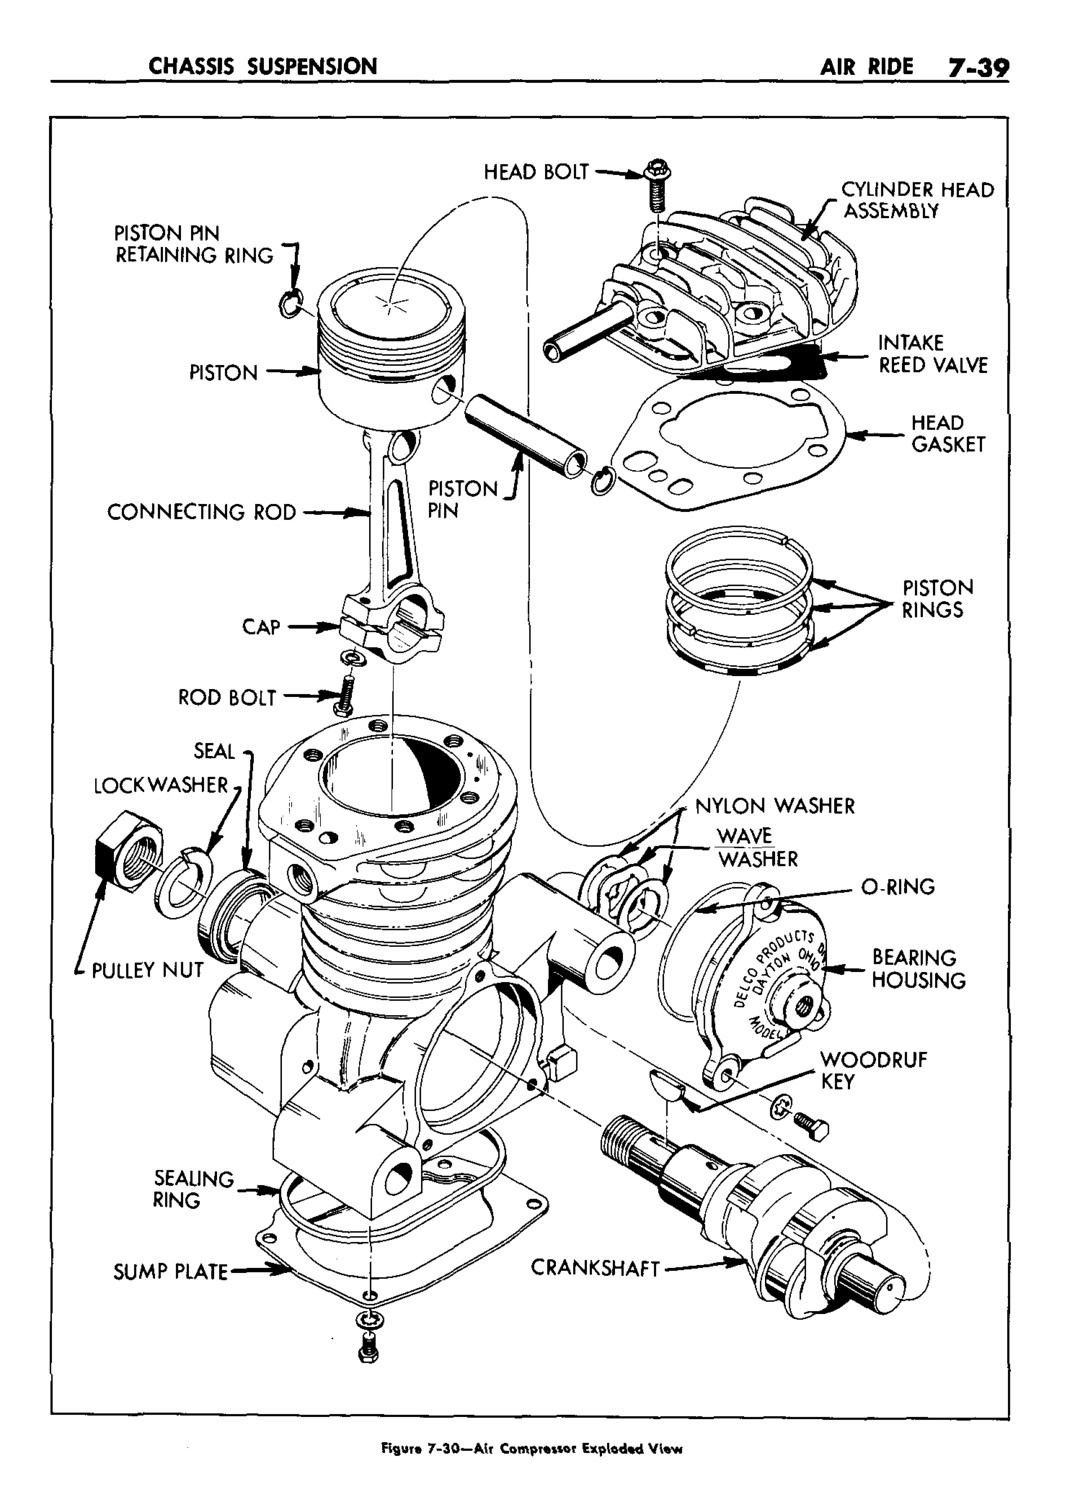 n_08 1959 Buick Shop Manual - Chassis Suspension-039-039.jpg